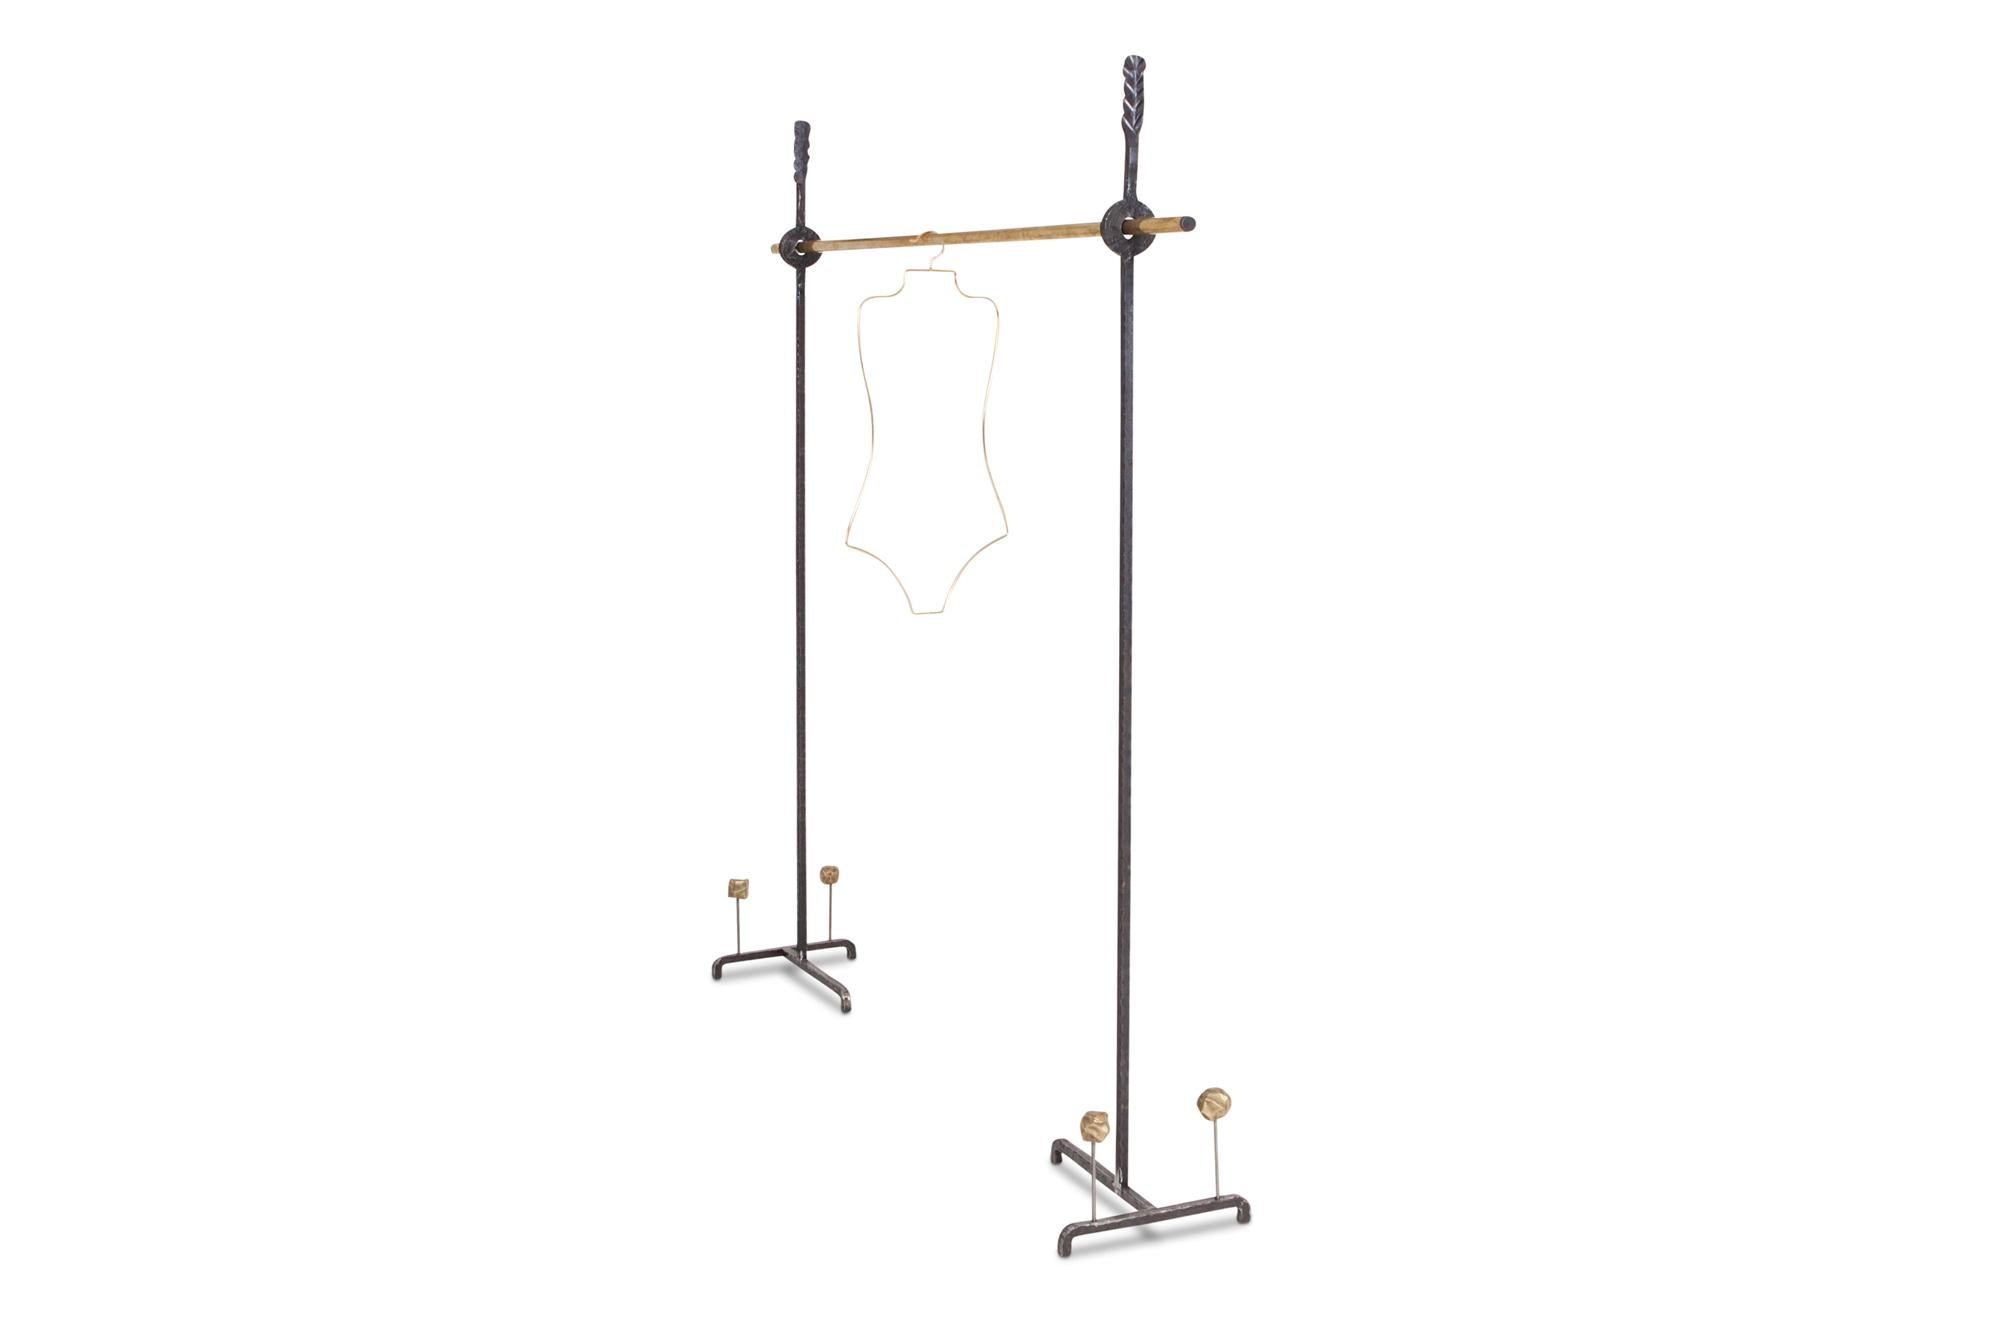 European Hollywood Regency Bespoke Clothing Rack in Wrought Iron and Brass